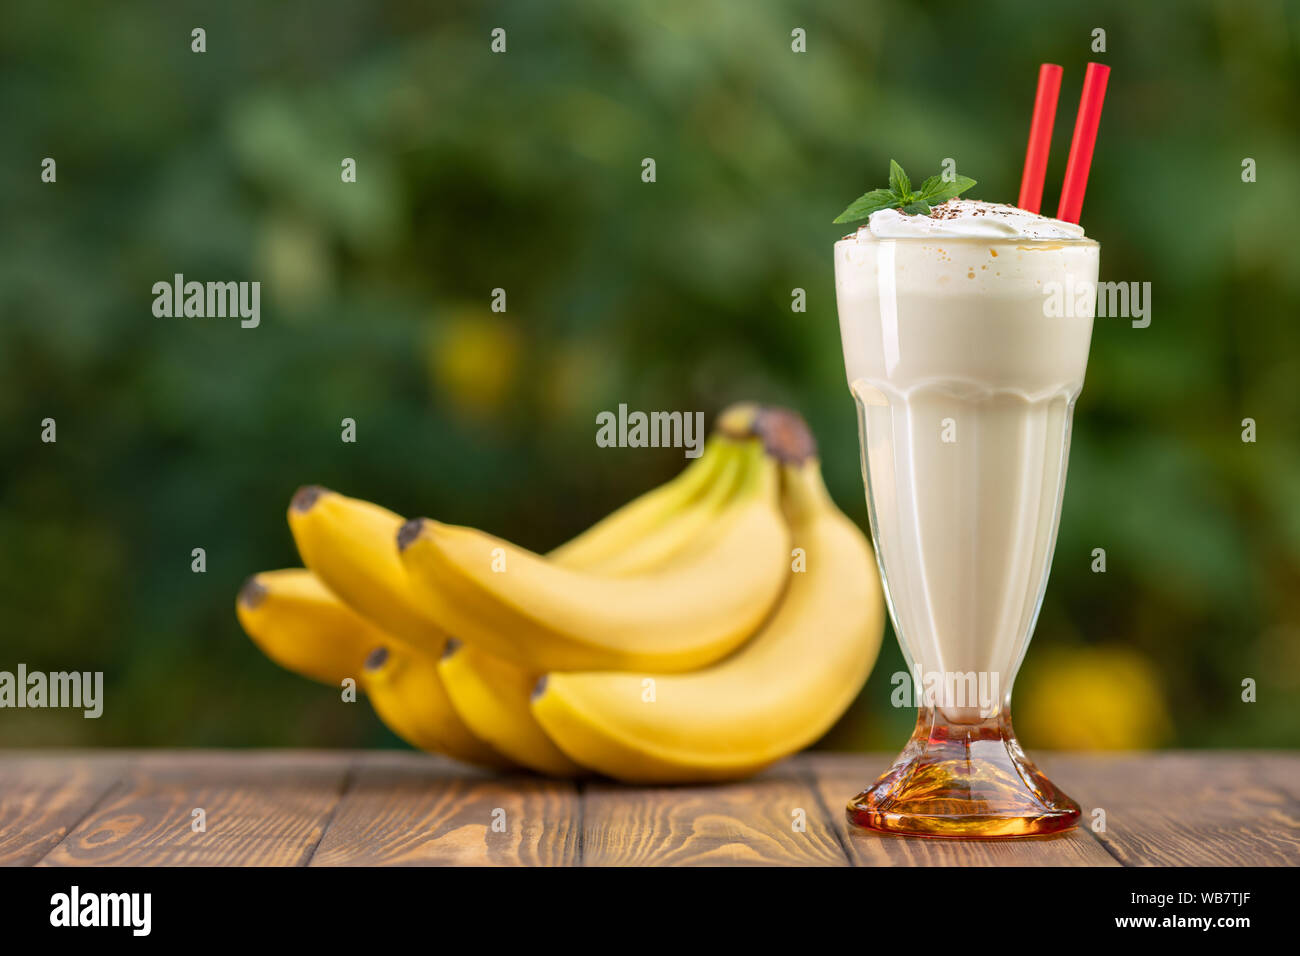 banana milkshake in glass with whipped cream on wooden table with green blurred natural background Stock Photo